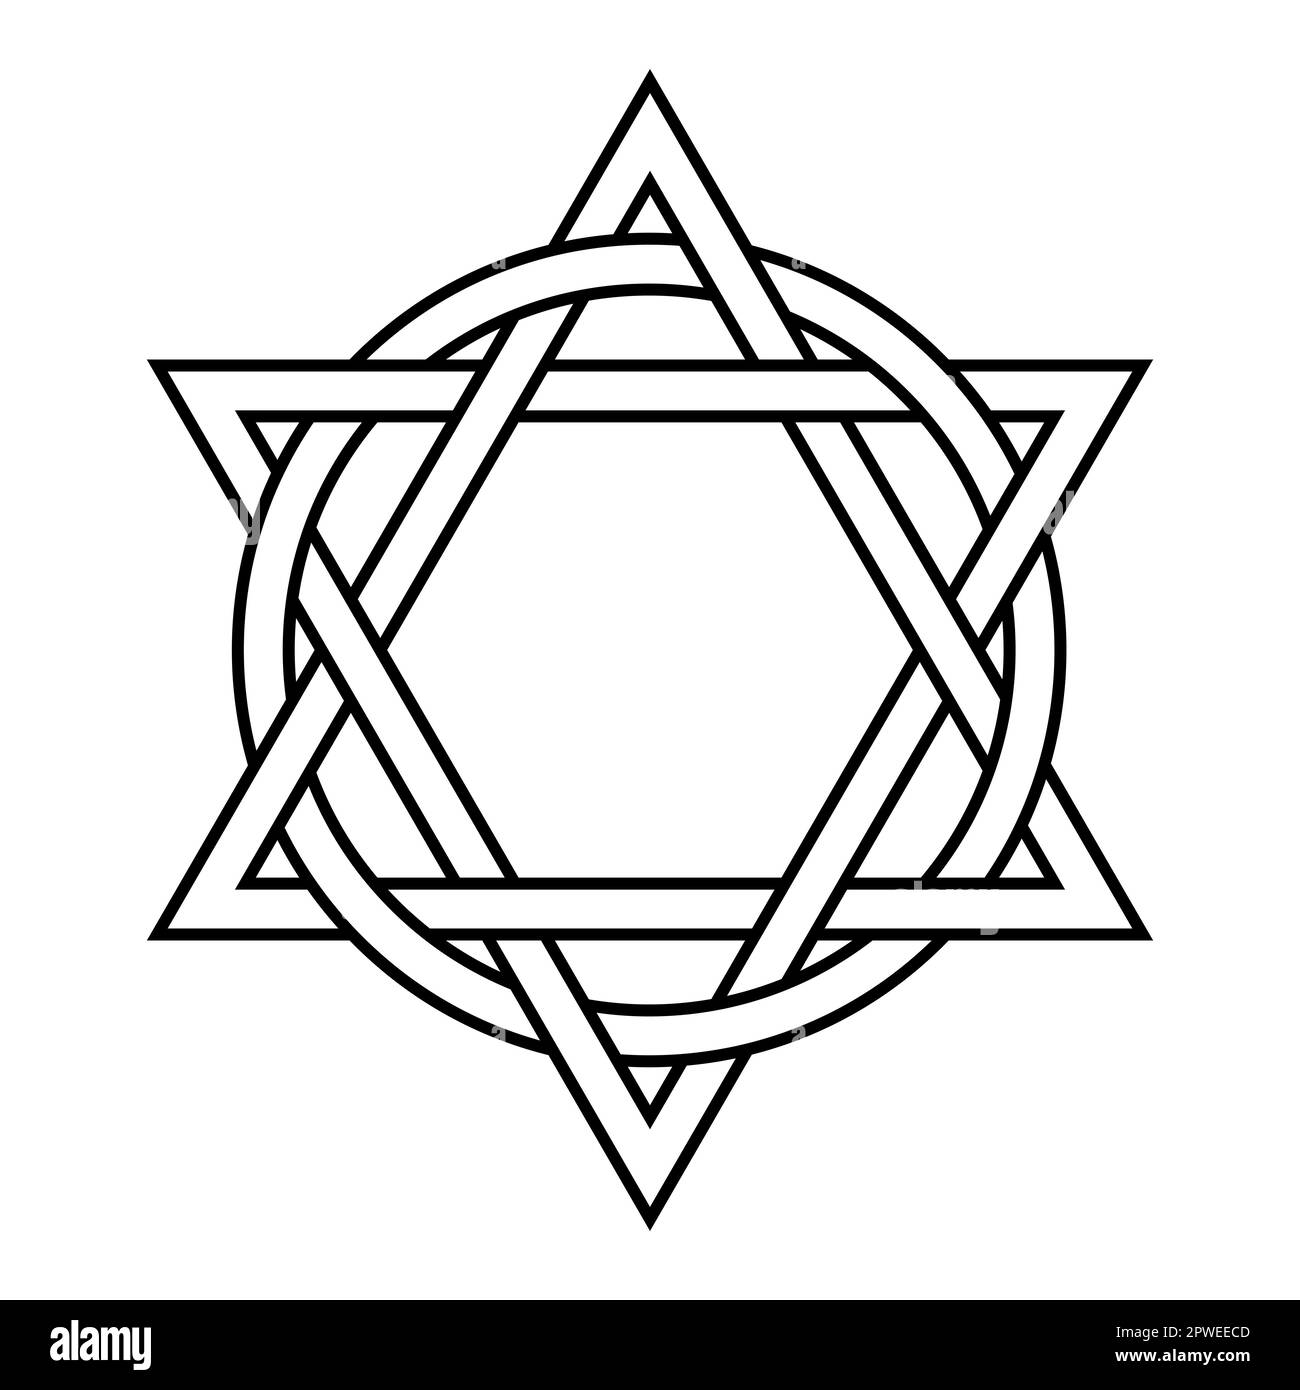 Two triangles interlaced with a circle. Ancient Christian emblem, representing the eternity and the perfection of the Trinity. Stock Photo